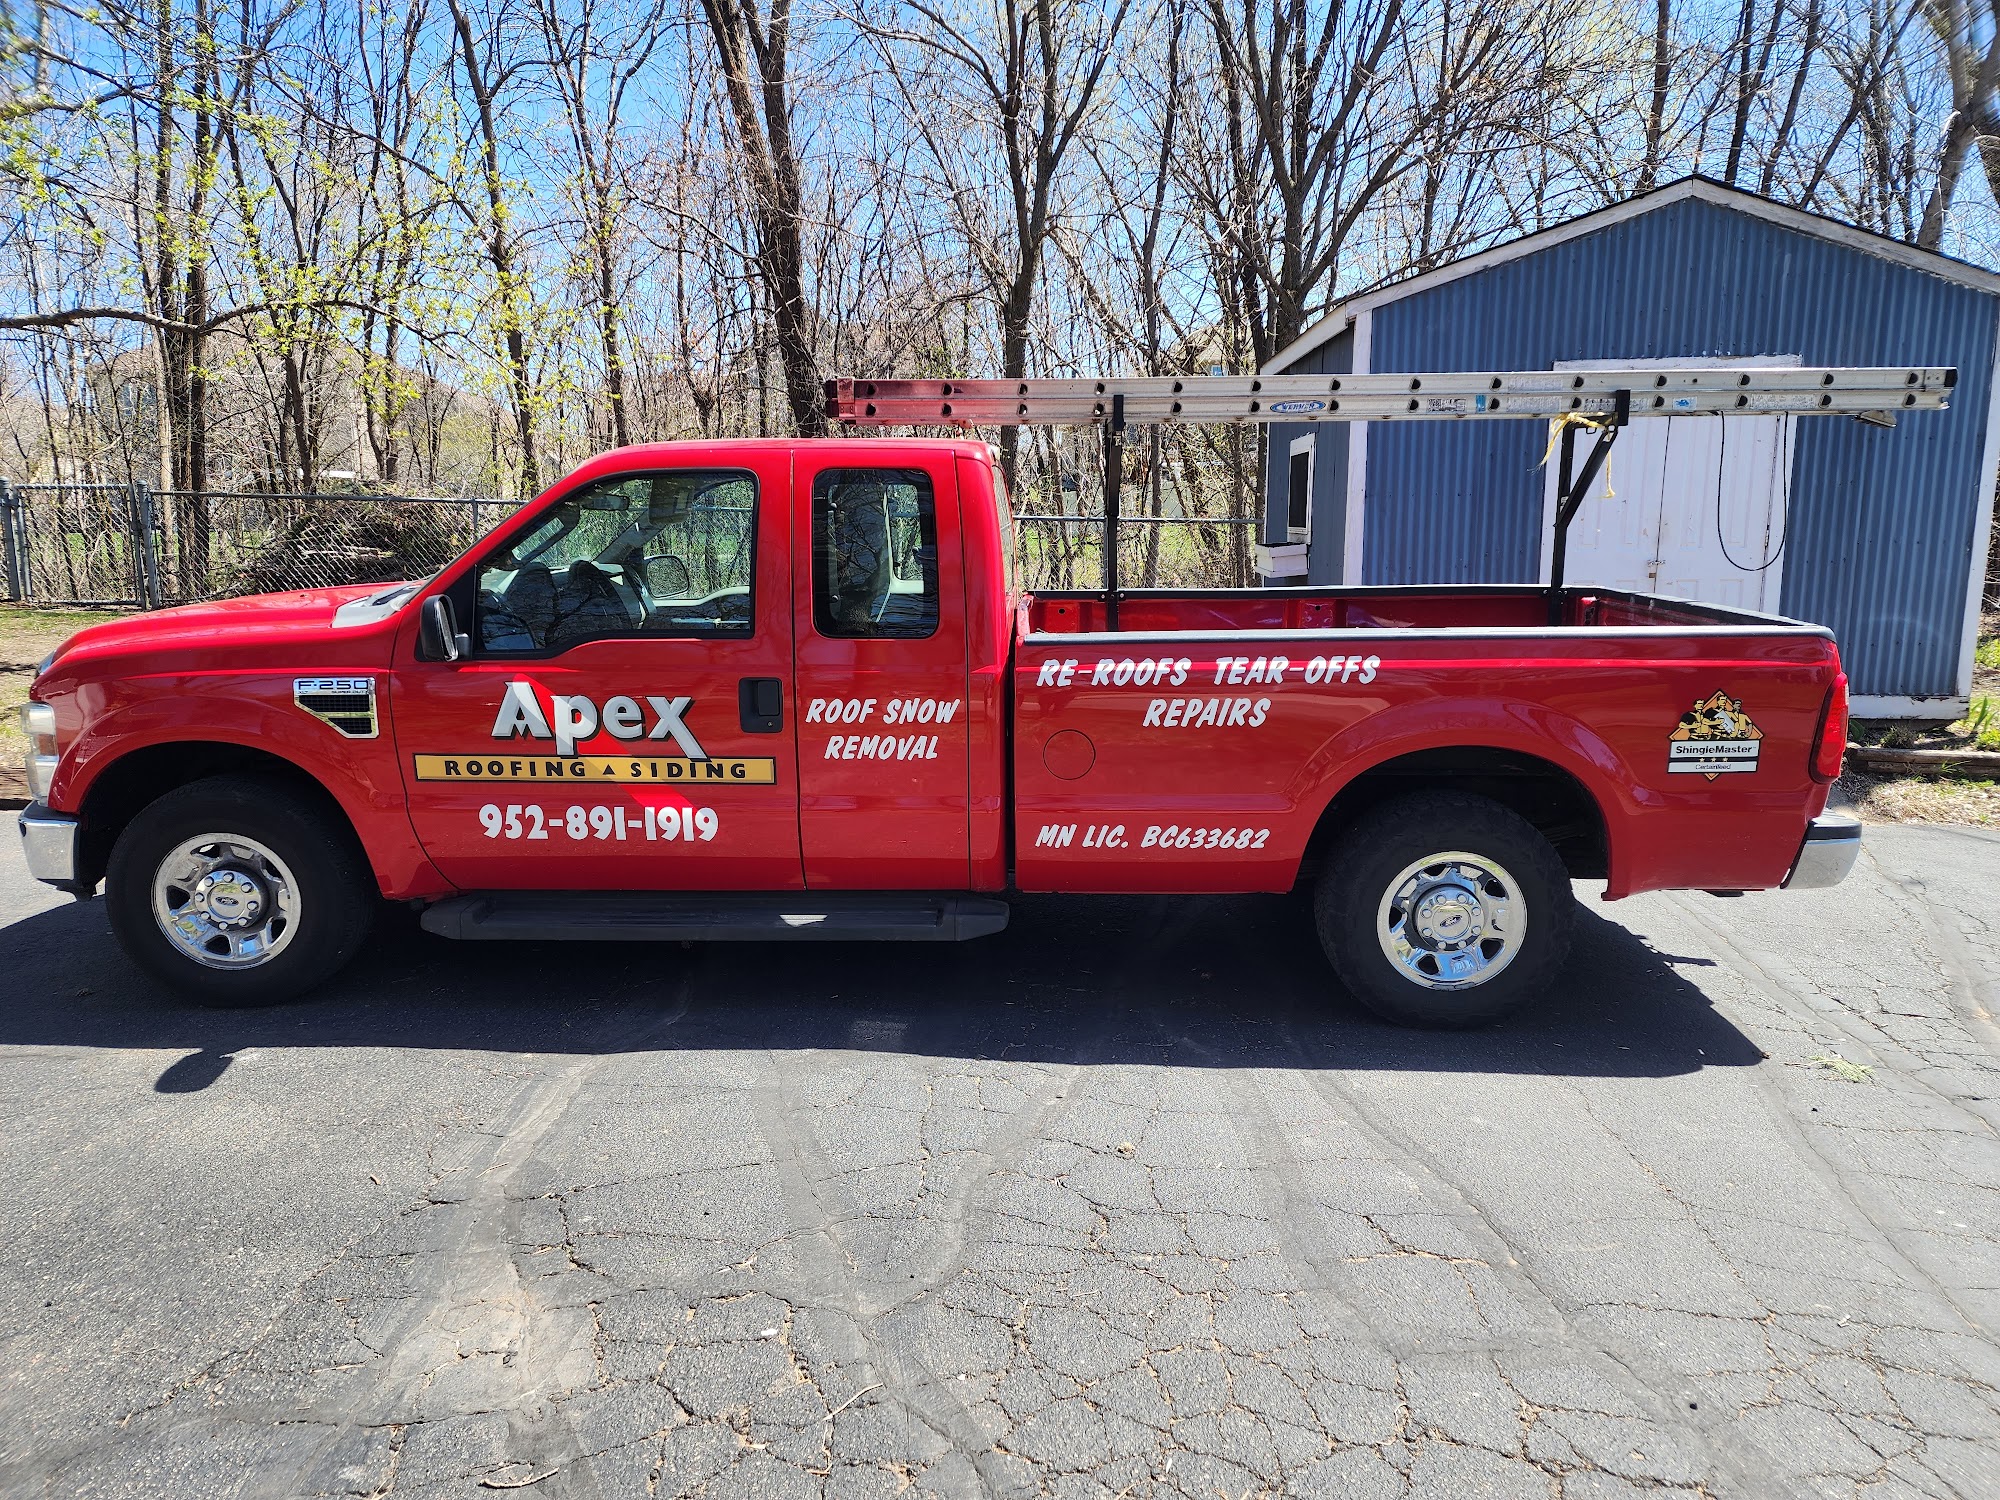 Apex Roofing & Siding Co